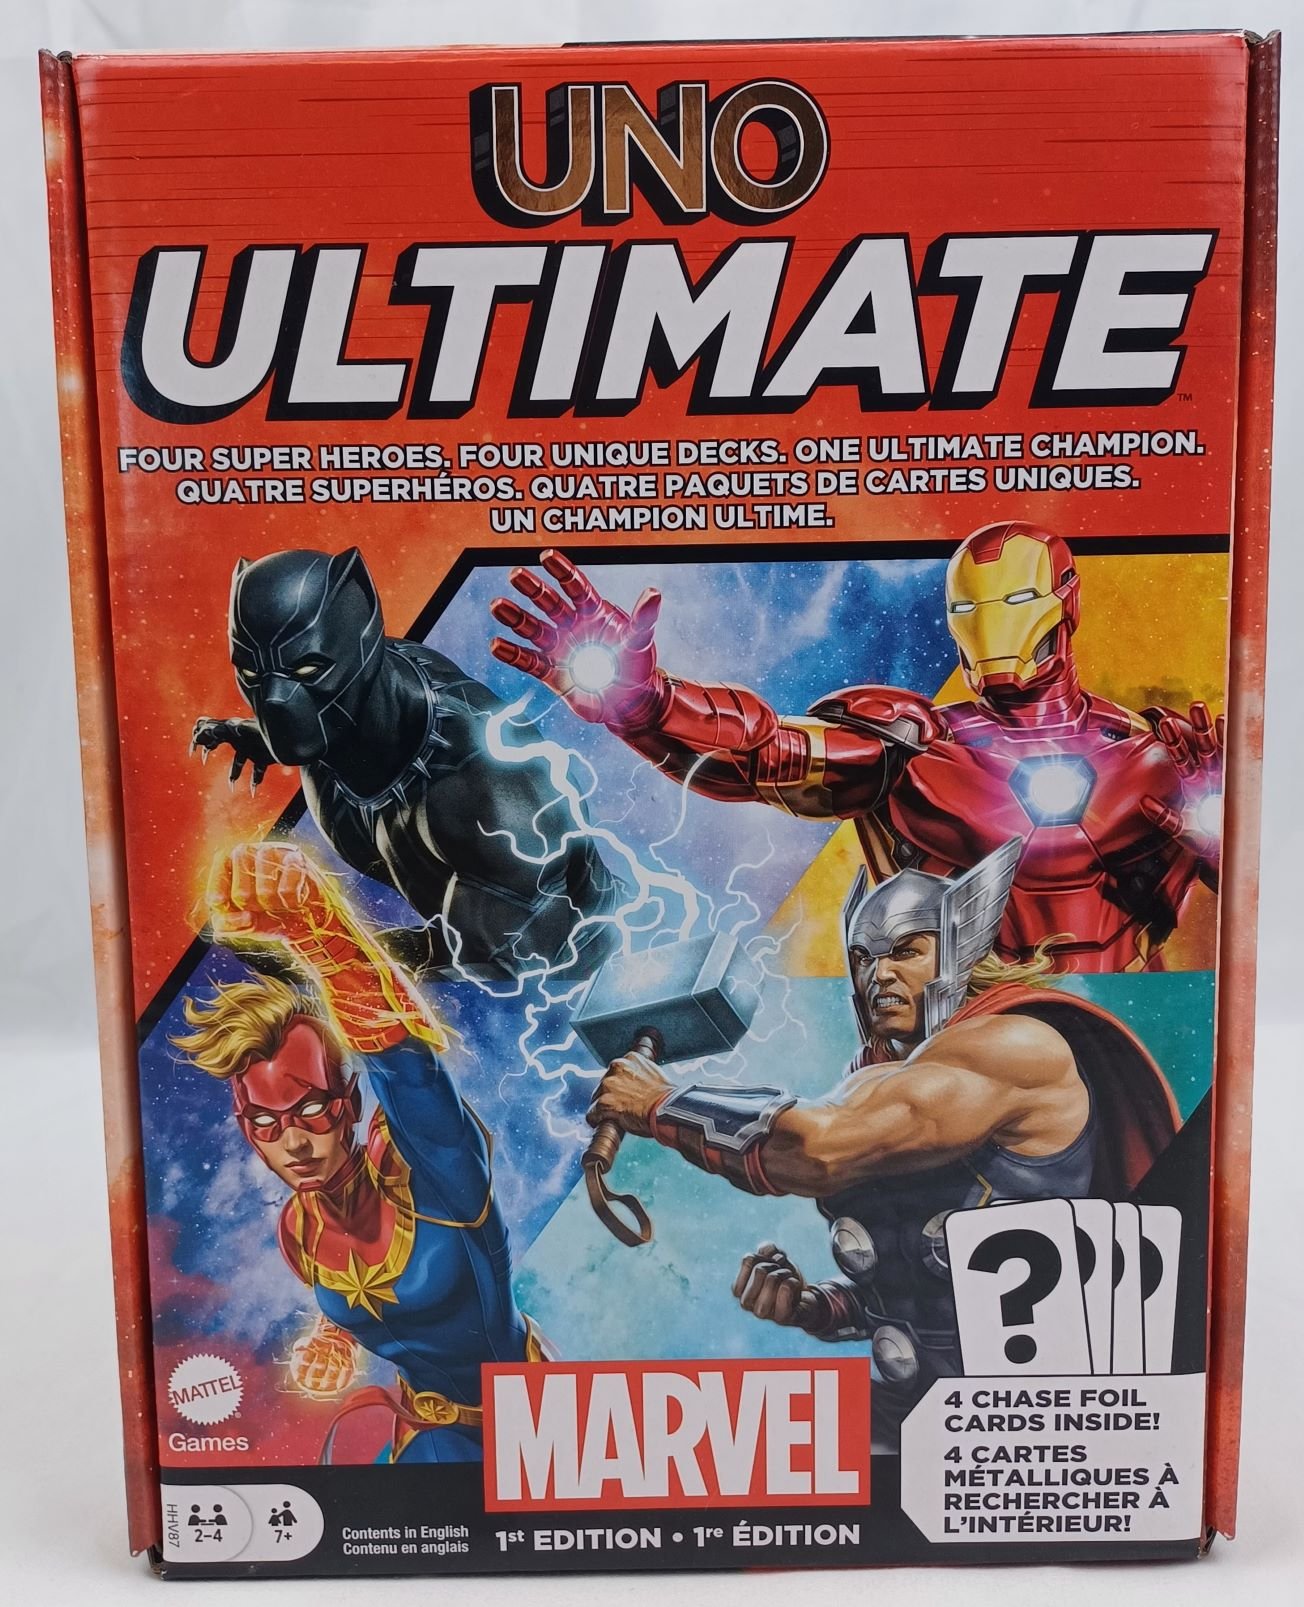 How to Play UNO Ultimate Marvel Card Game (Review and Rules)